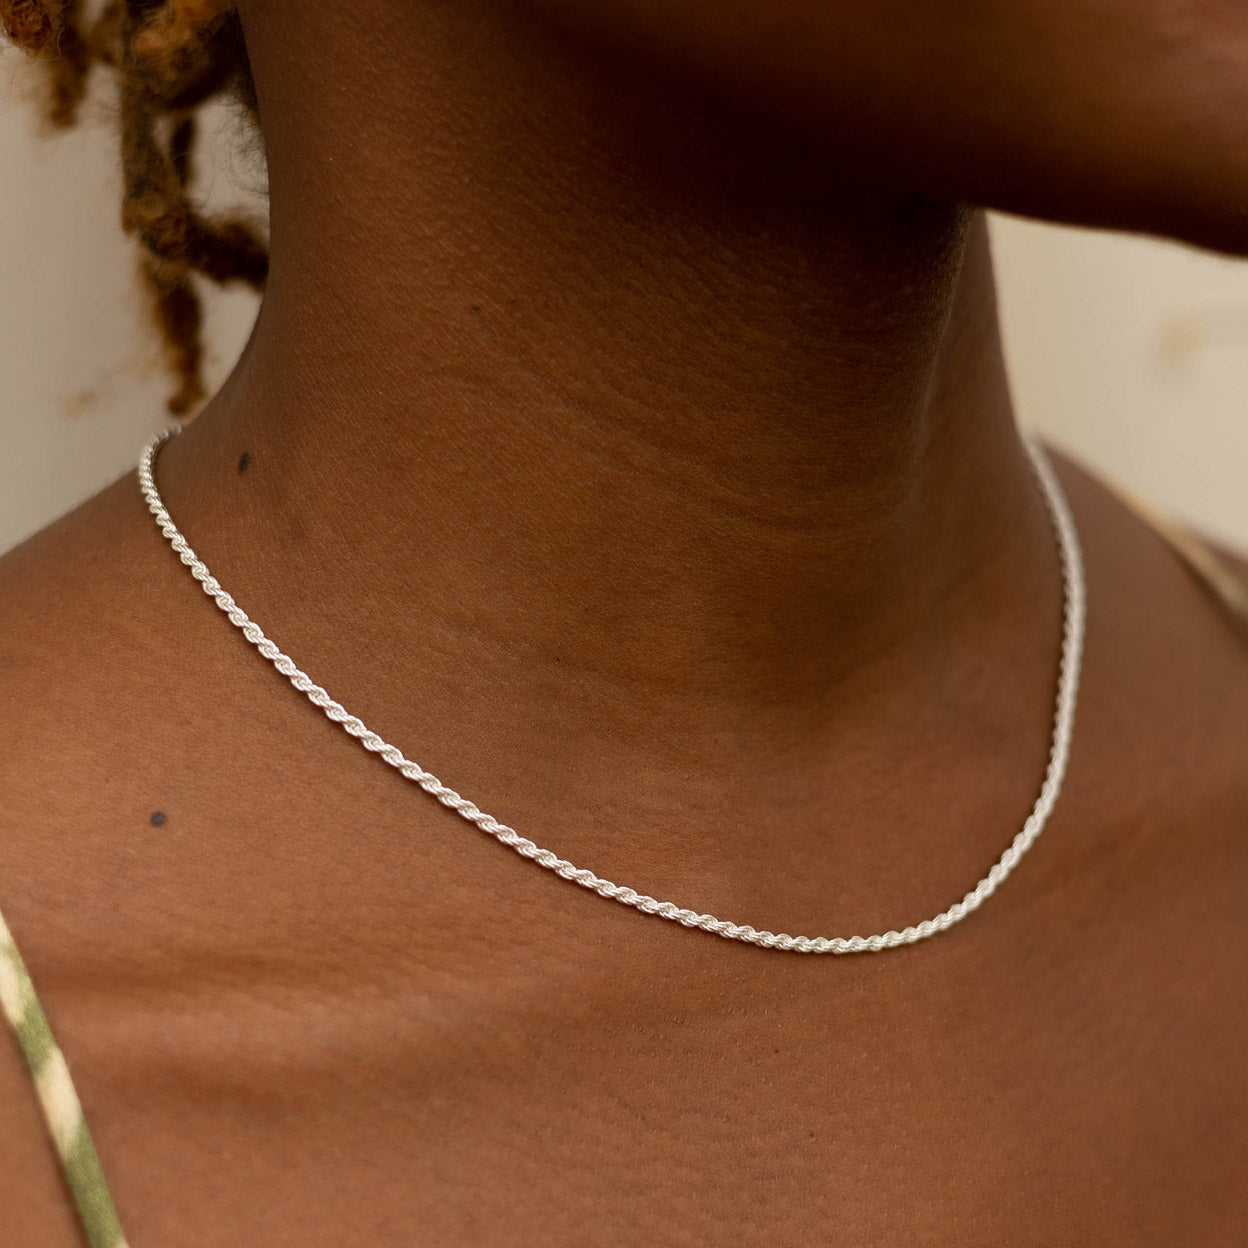 Silver Rope Chain Necklace | Vintage Women's jewelry Necklace 40cm length